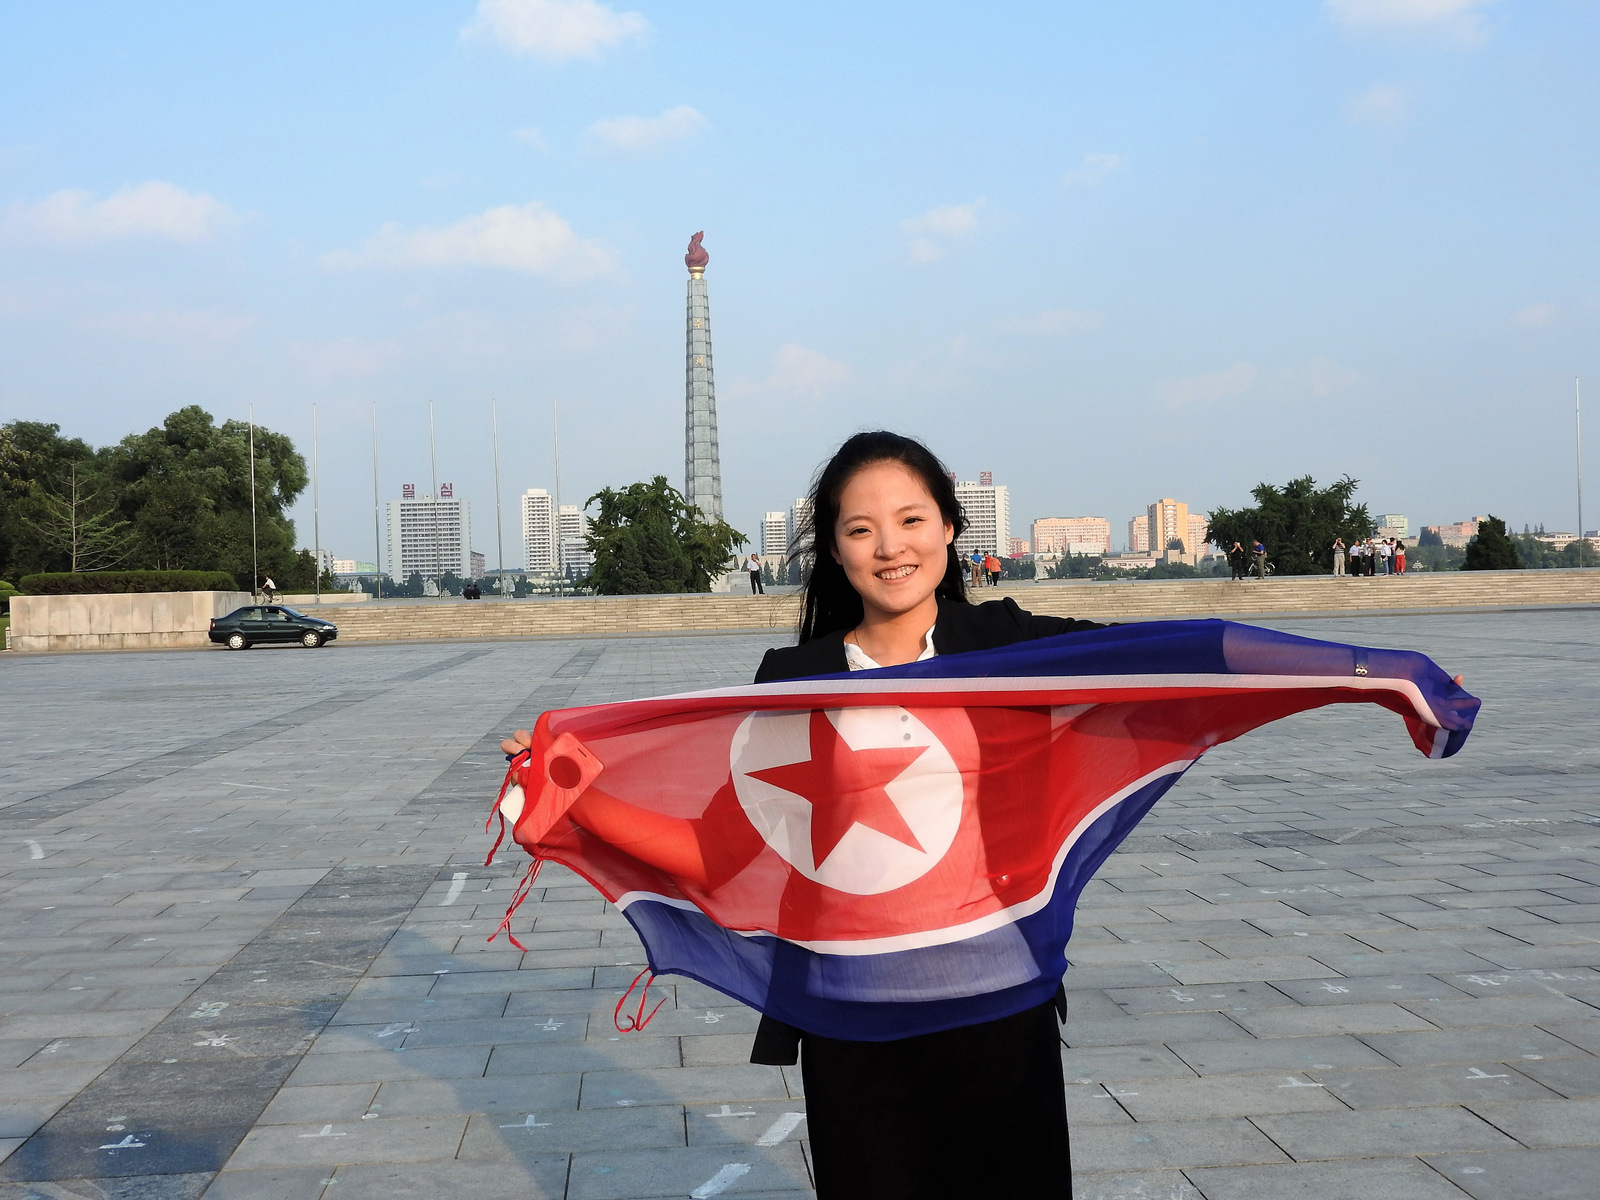 One of our hosts, Kim-Young, holding the flag of the DPRK. Behind her, the Juche tower, so-named after the dominant philosophy of self-reliance. Our other host, Kim Song-Nam, explained: “The Juche philosophy was created by President Kim Il-Sung. Man decides his own destiny, we rely on our own resources.”